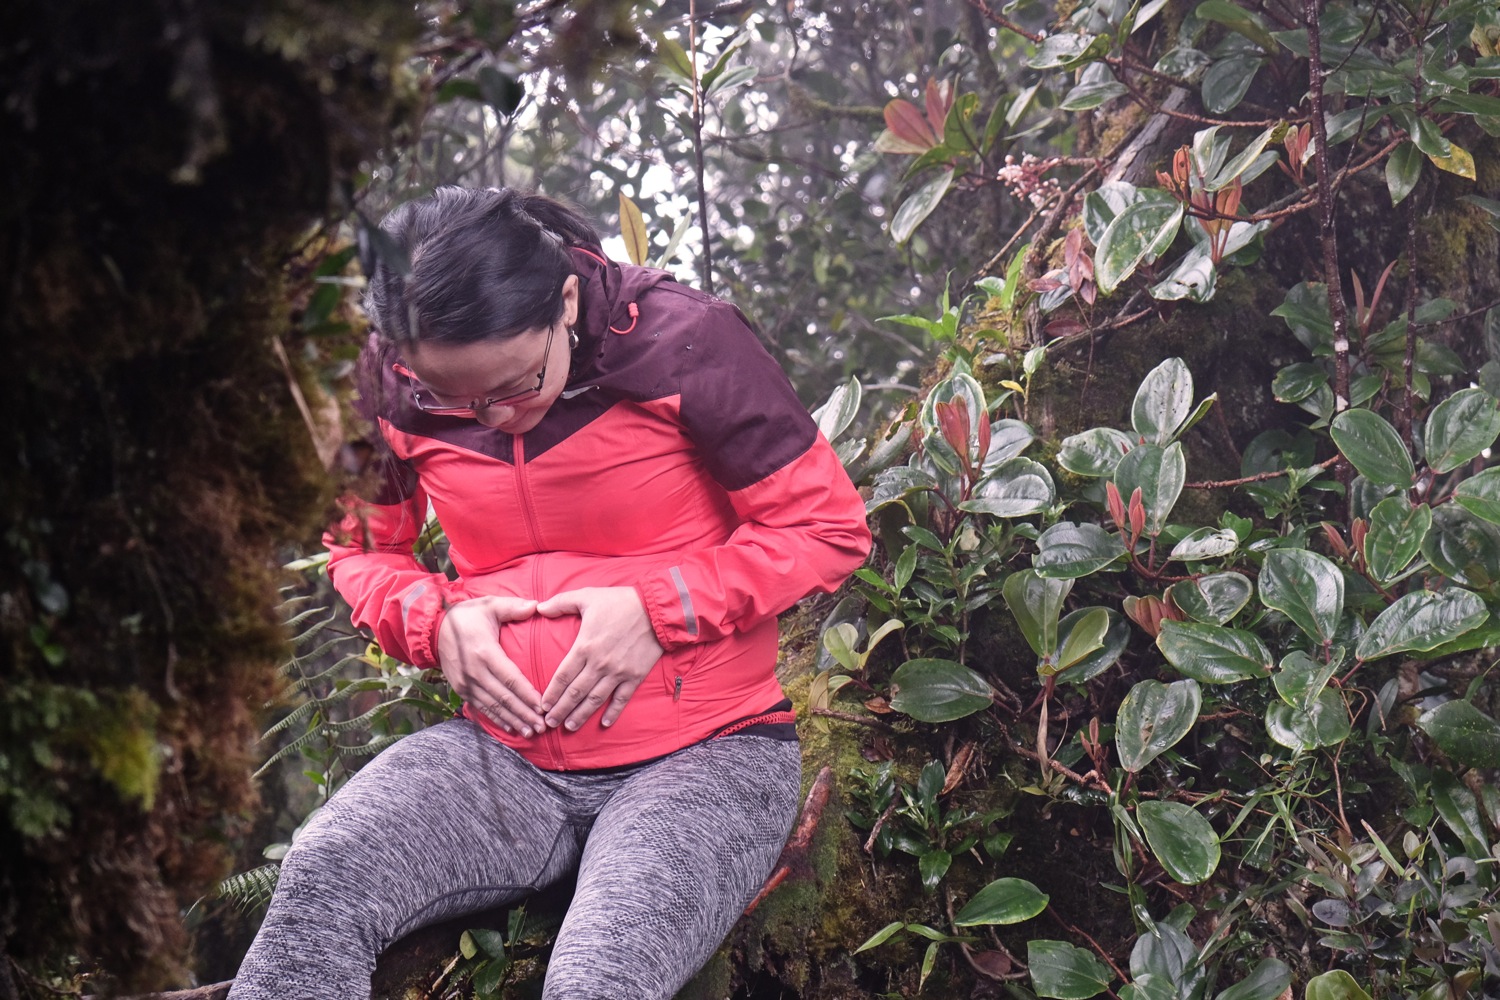 Mossy forest Cameron Highlands maternity photography